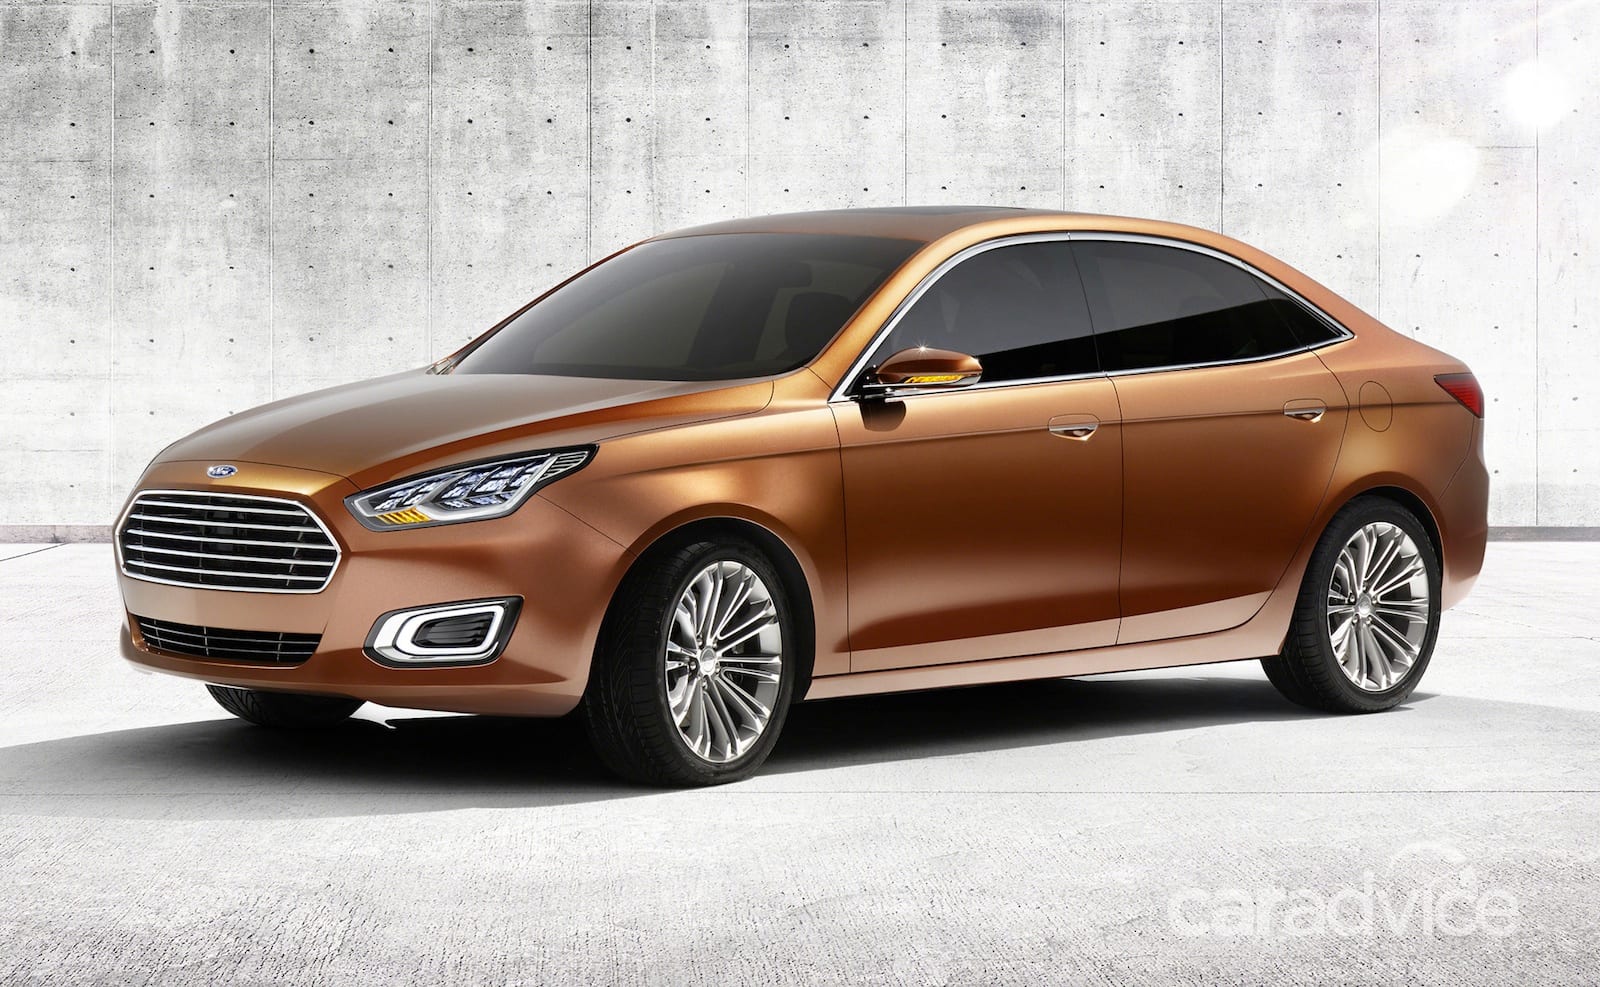 ford-australia-r-d-team-looks-to-develop-more-upmarket-cars-for-the